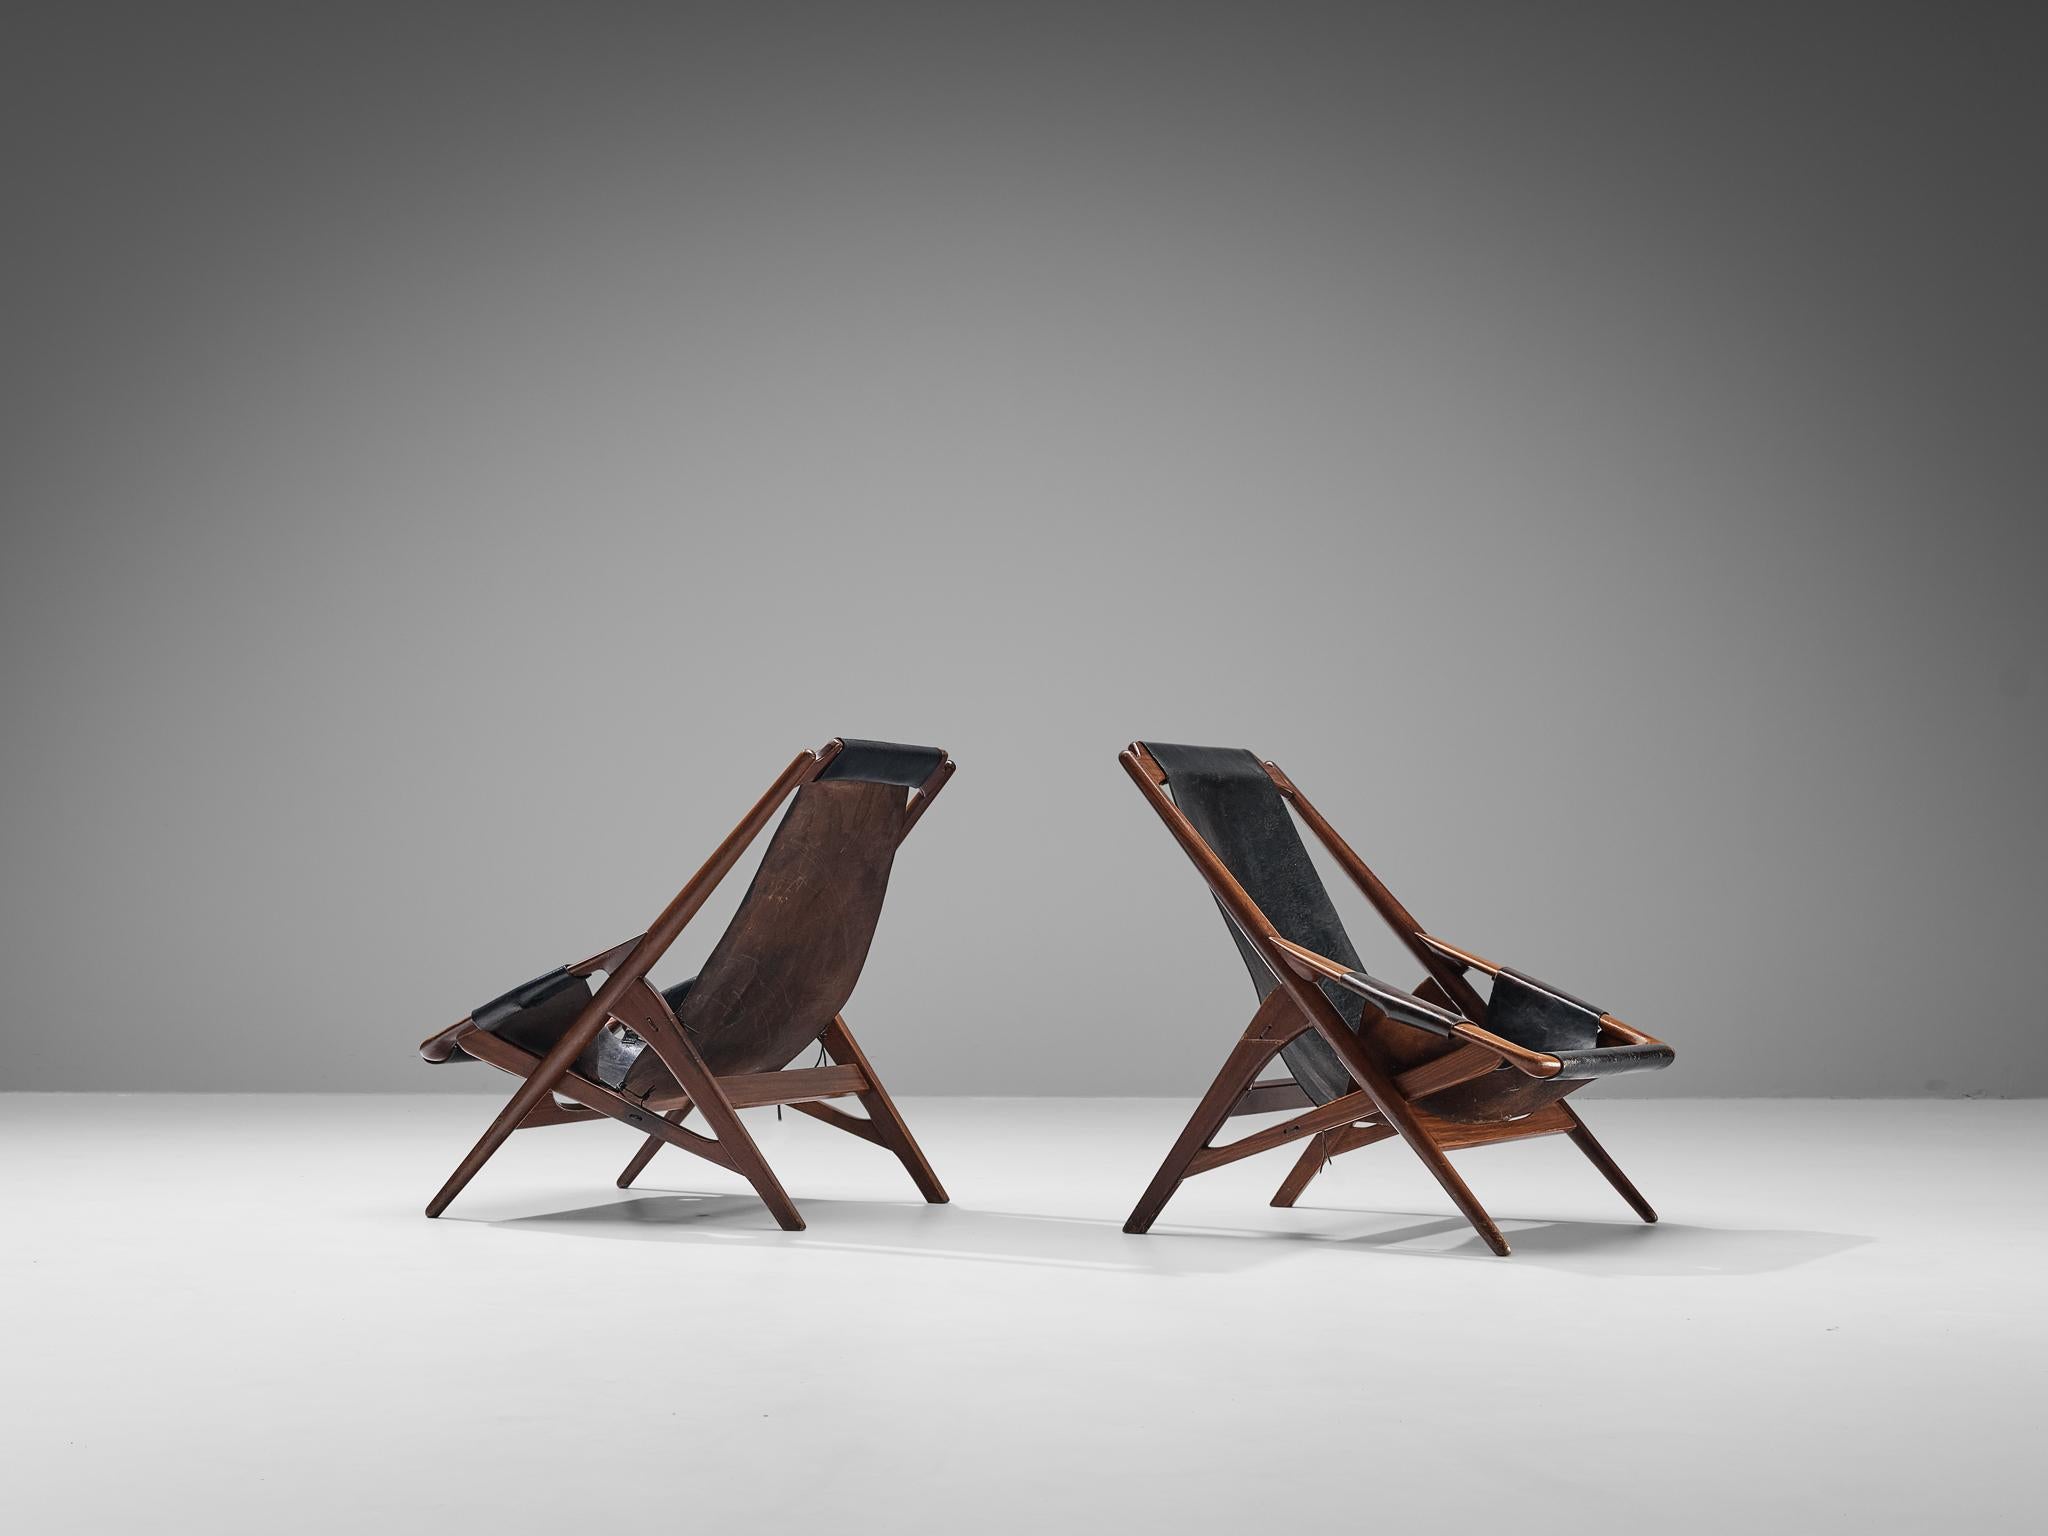 W.D. Andersag, pair of lounge chairs, teak, leather, steel, Italy, 1960s

Beautiful pair of armchairs designed by W.D. Ansersag. This design has a very dynamic appearance by means of the sharp lines discernible in the wooden frame. The solid